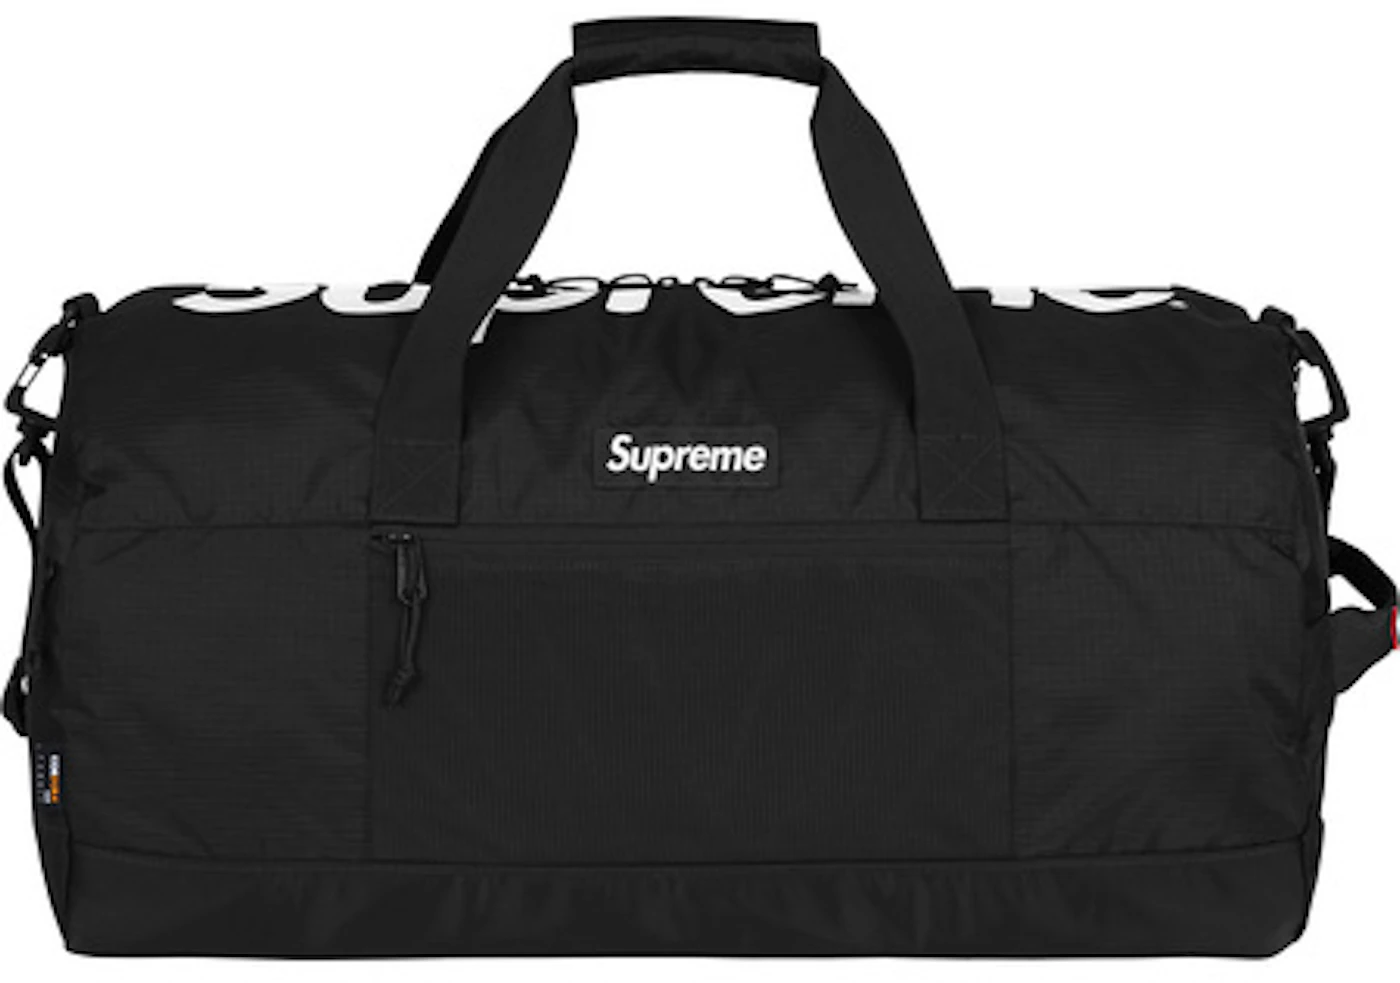 Supreme SS17 Waist Bag, Backpack, & Duffle Bag! Review + Quick